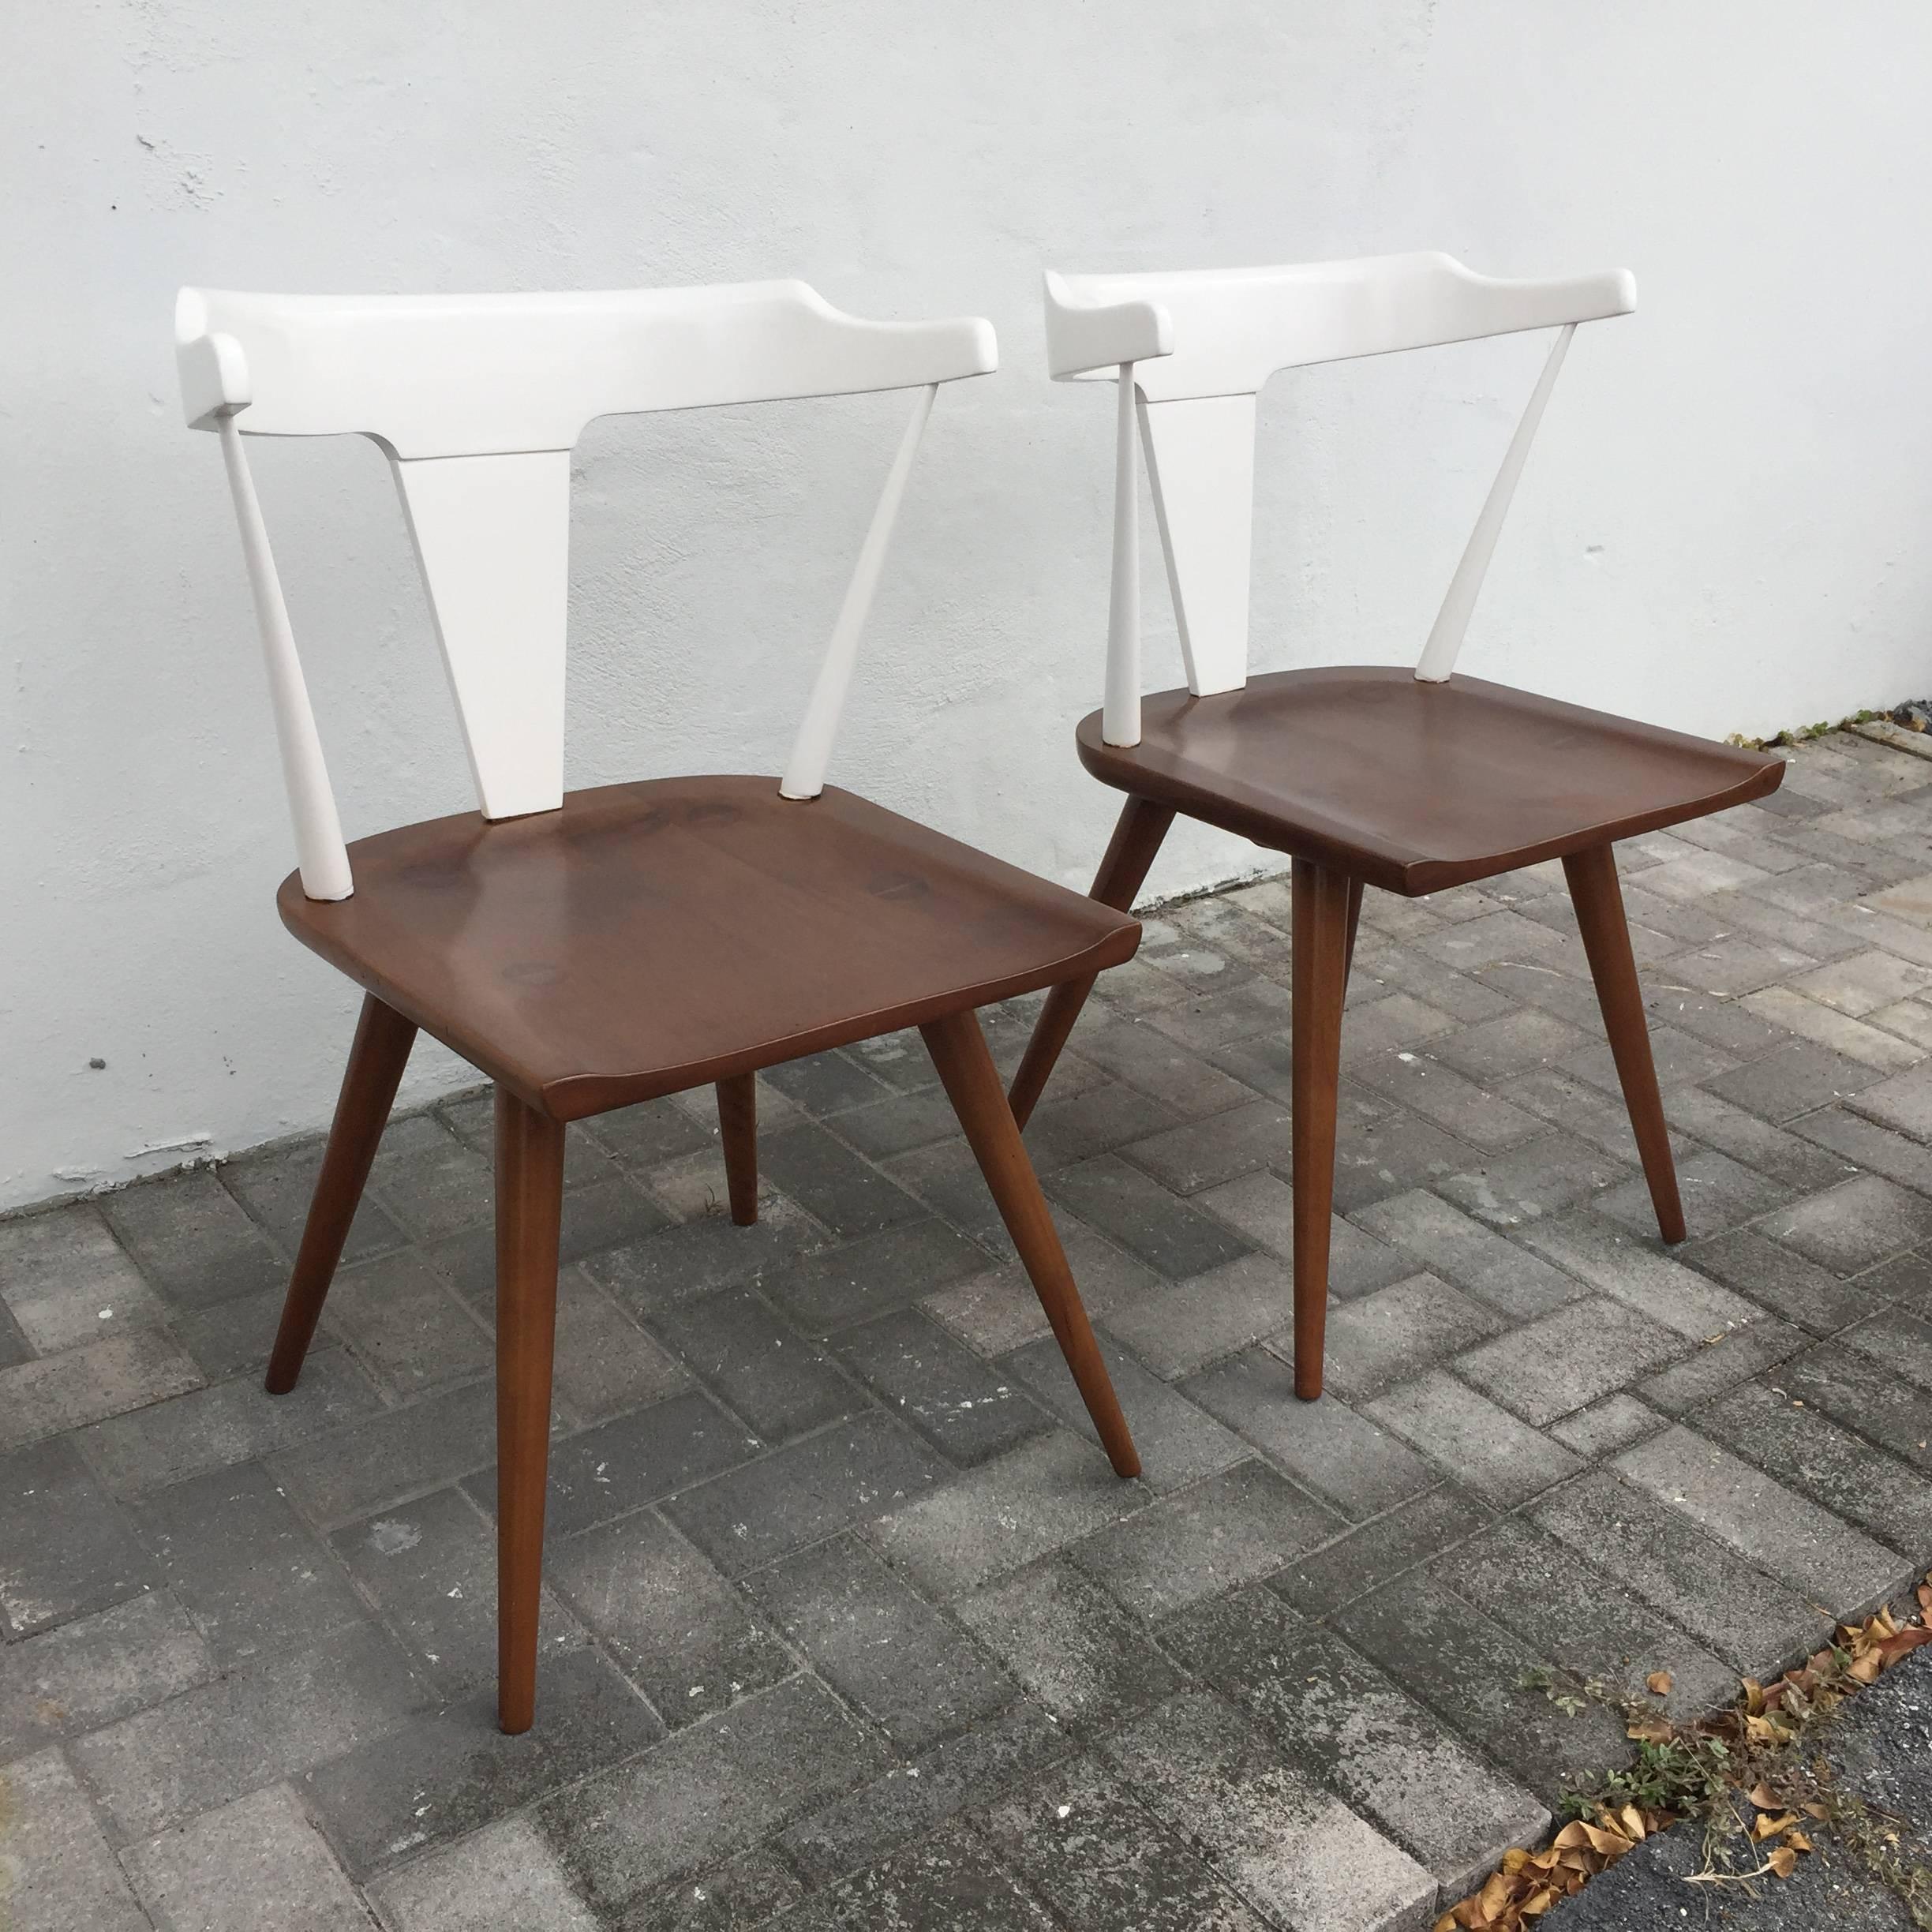 Beautifully lacquered in two tones, white and natural wood in brown stain. We have a second similar pair of McCobb chairs that can make a lovely set of four.